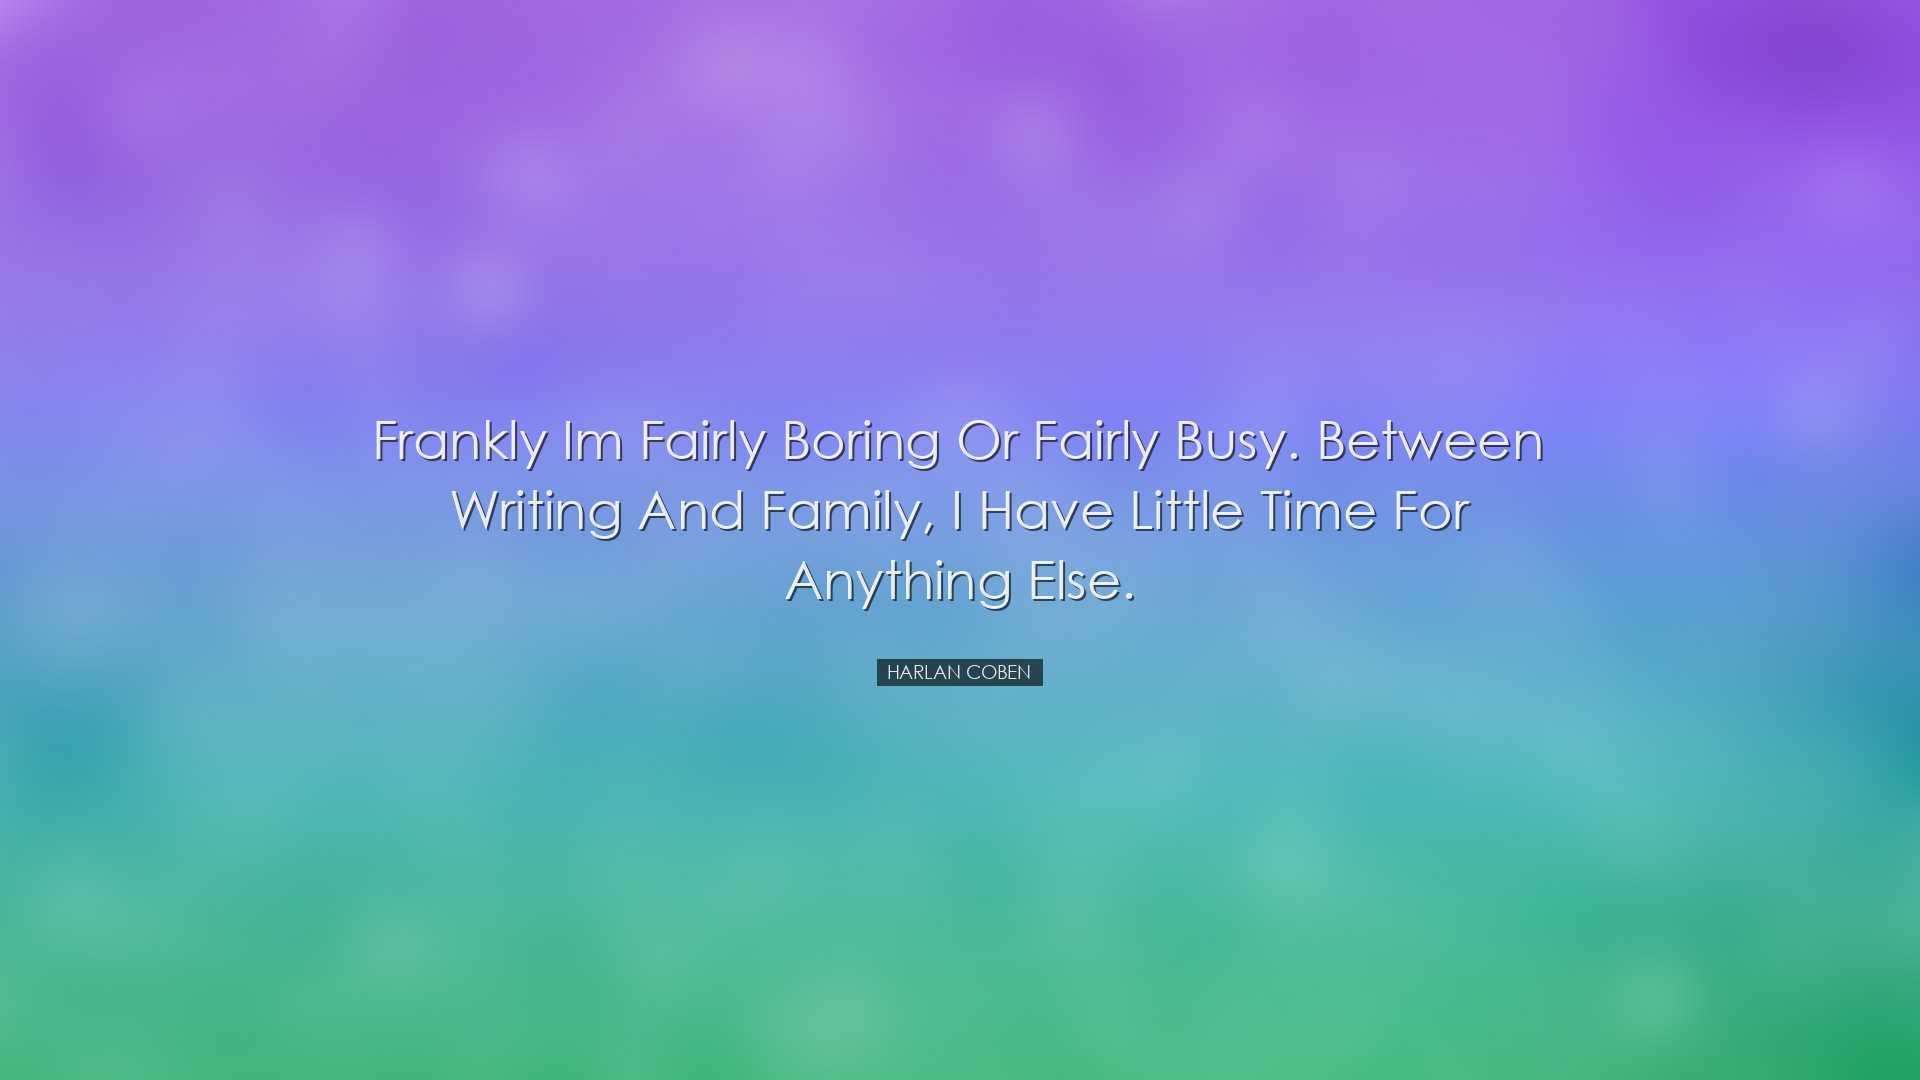 Frankly Im fairly boring or fairly busy. Between writing and famil